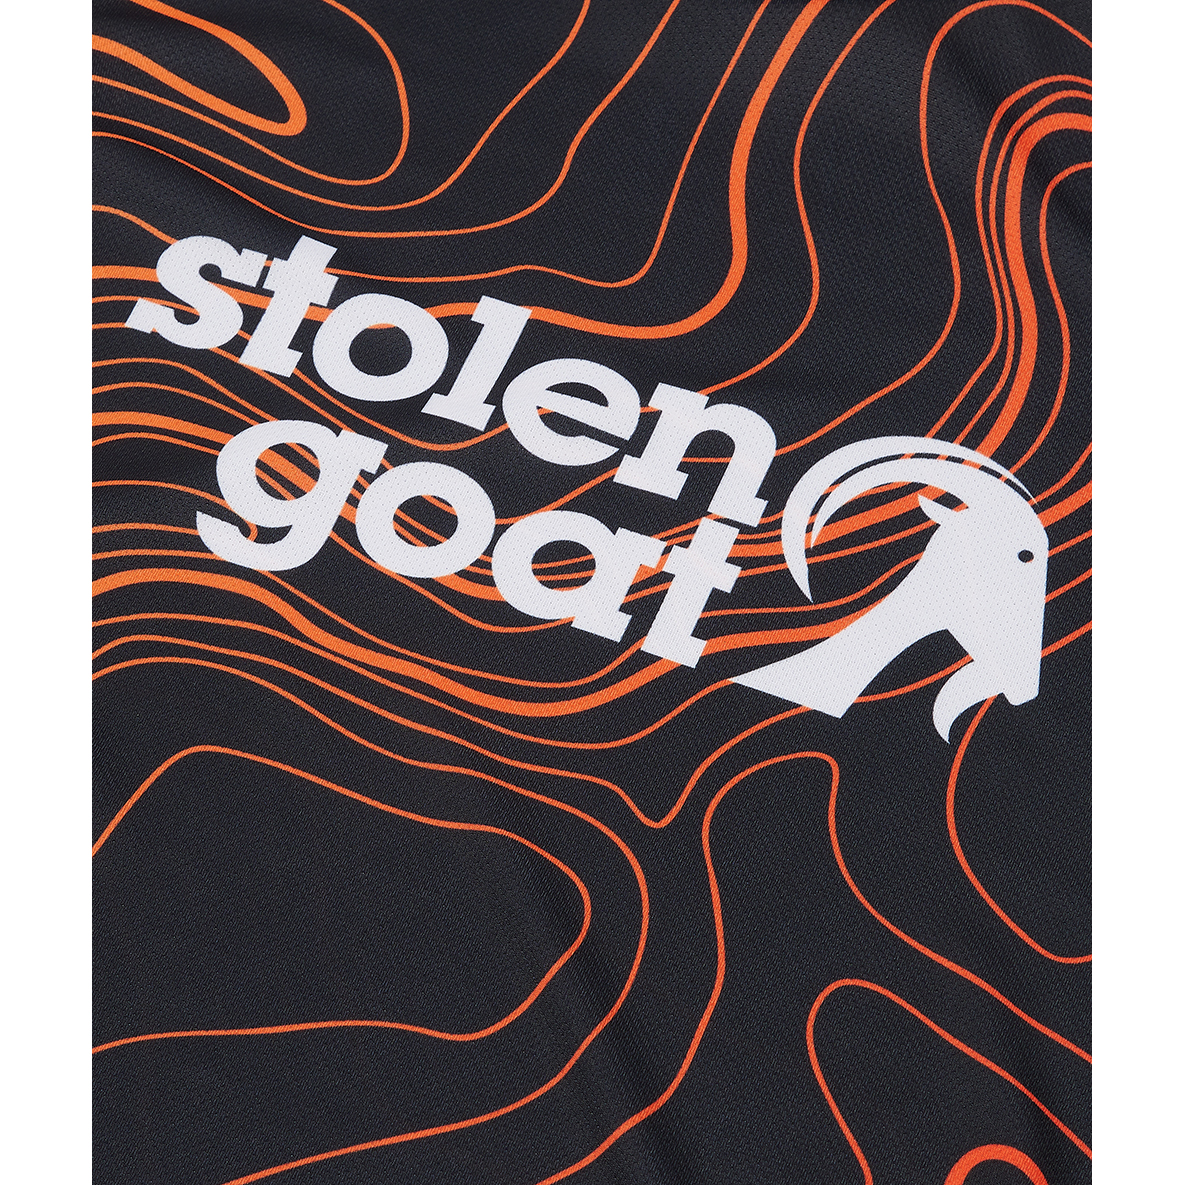 Close up of logo on Stolen Goat women's Topo mountain bike jersey black long-sleeved jersey with orange topographical design